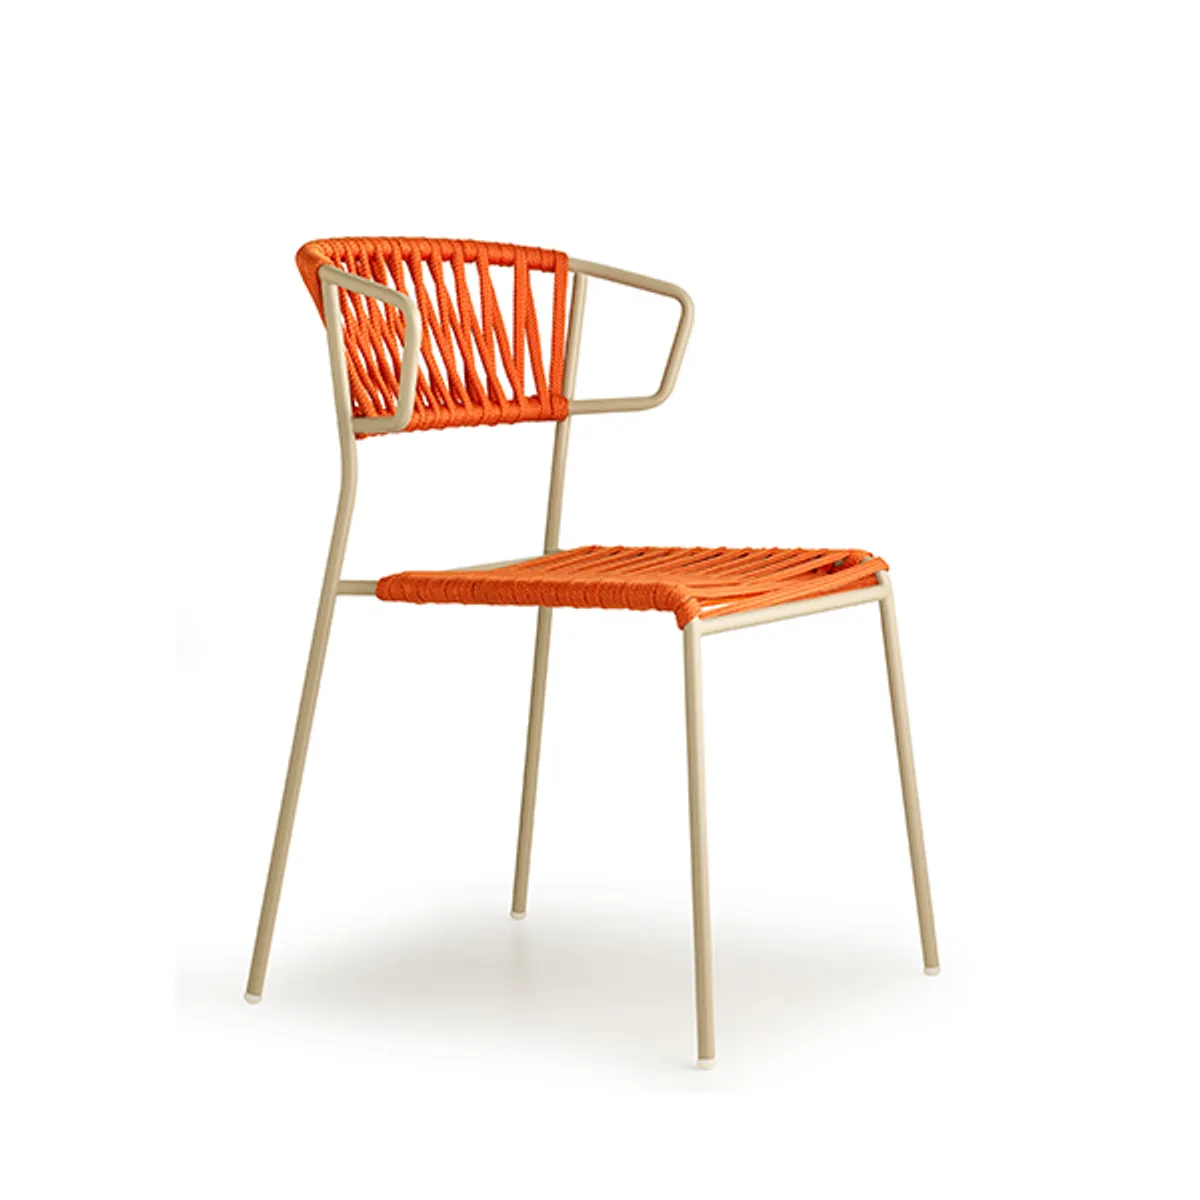 Robyn Weave Chair Outdoor Hospitality Furniture Insideoutcontracts Orange 080